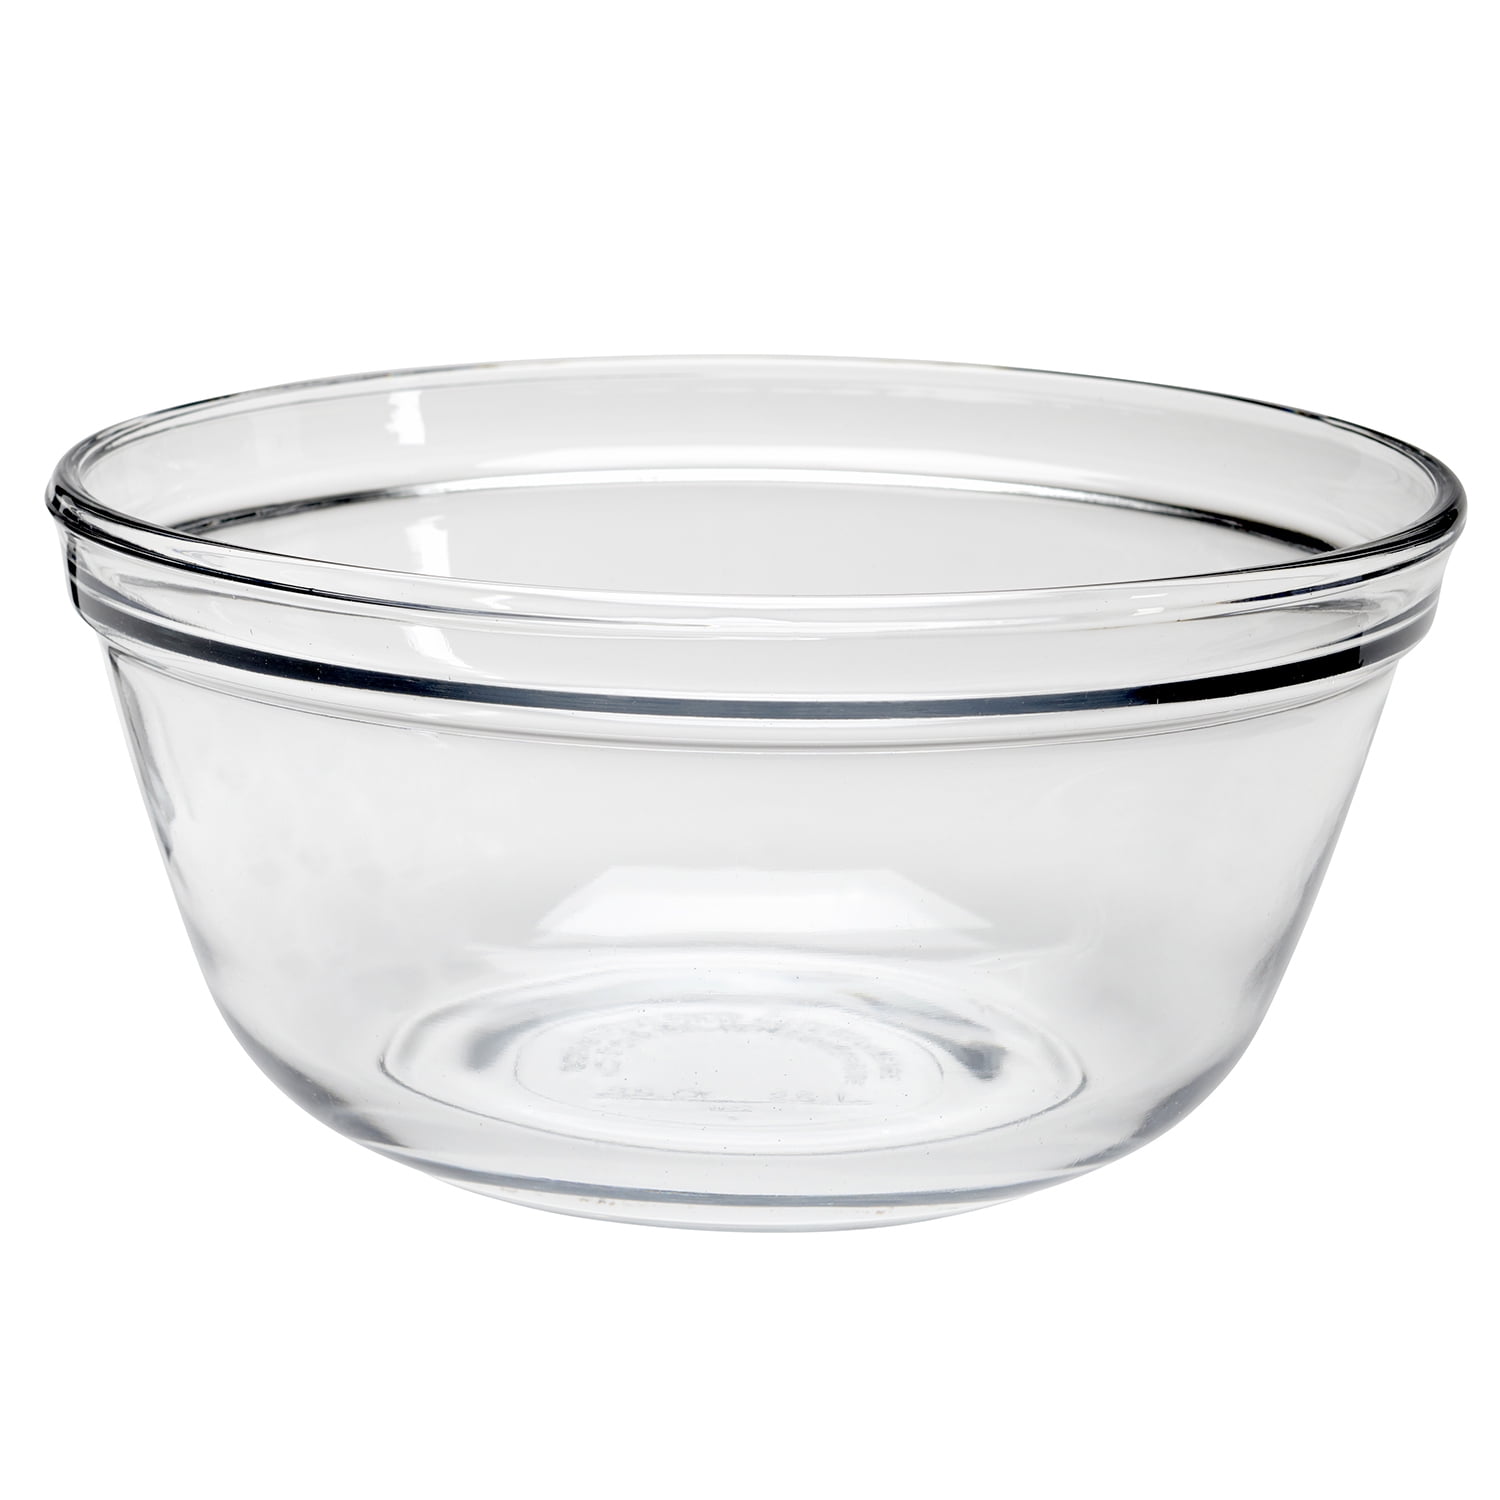 Anchor Hocking Batter Bowl with Red Lid, 2 qt